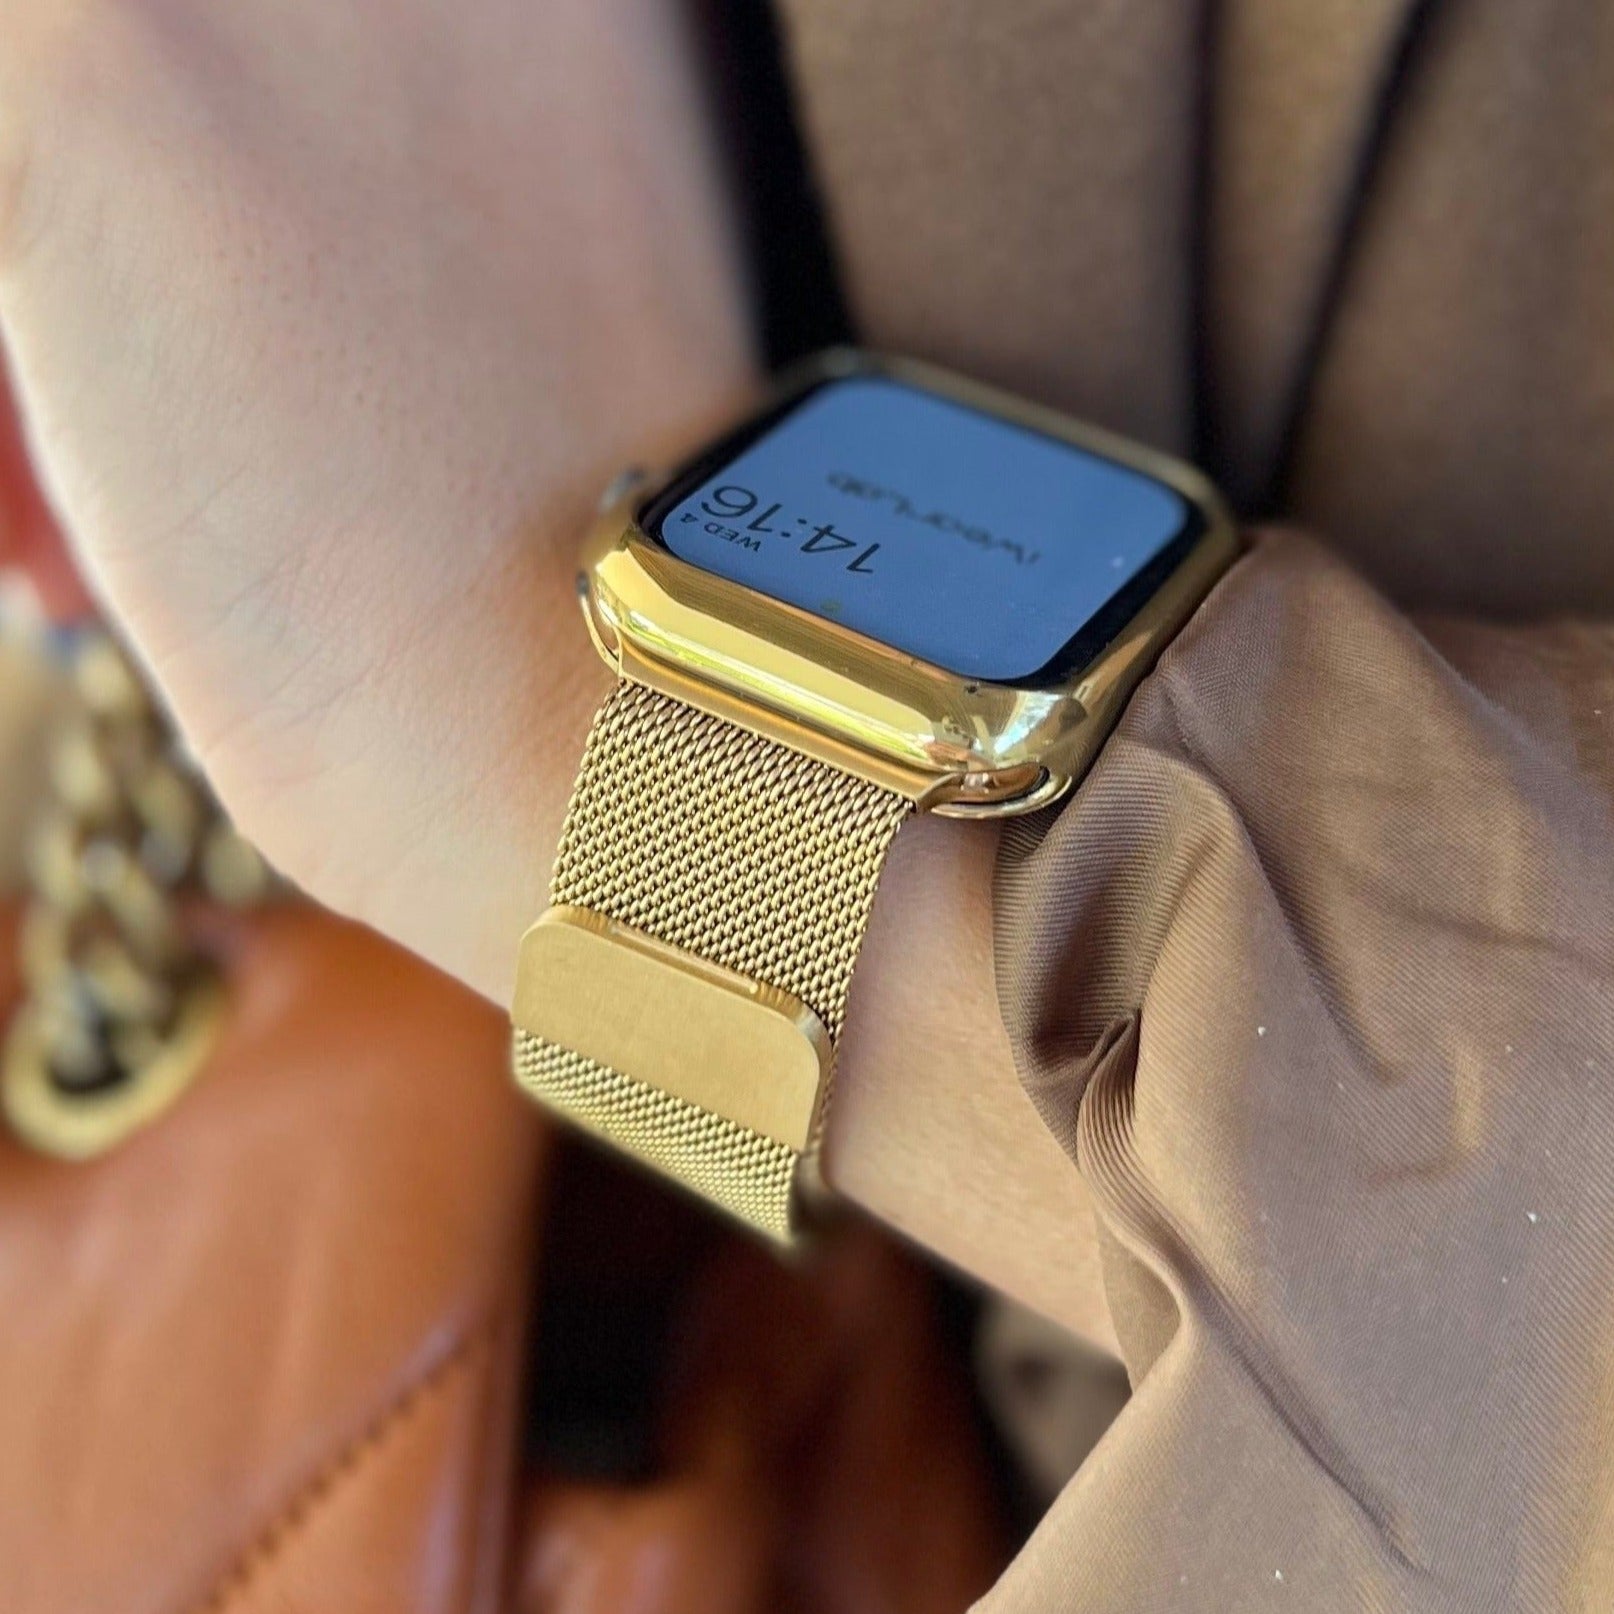 Milanese Mesh Band For Apple Watch